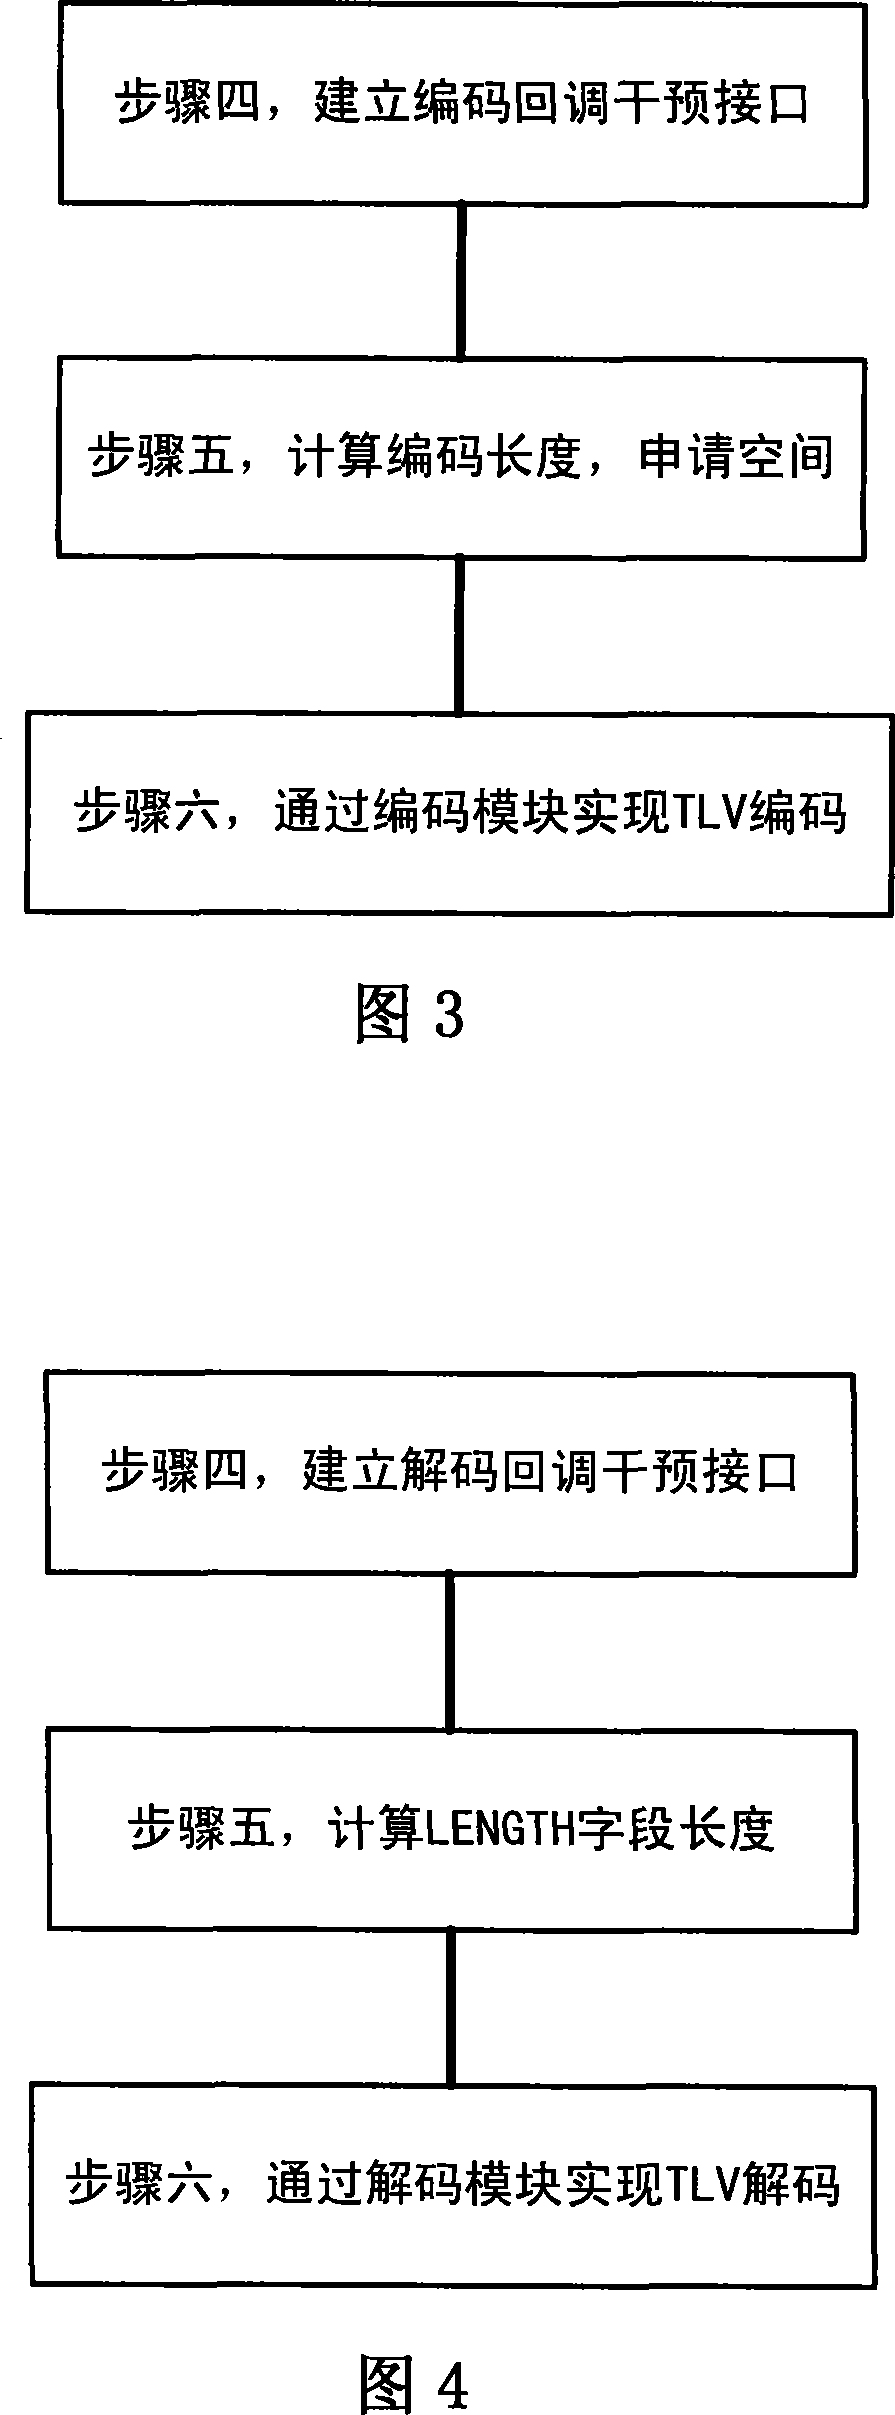 Method for implementing encoding/decoding of WiMAX system information